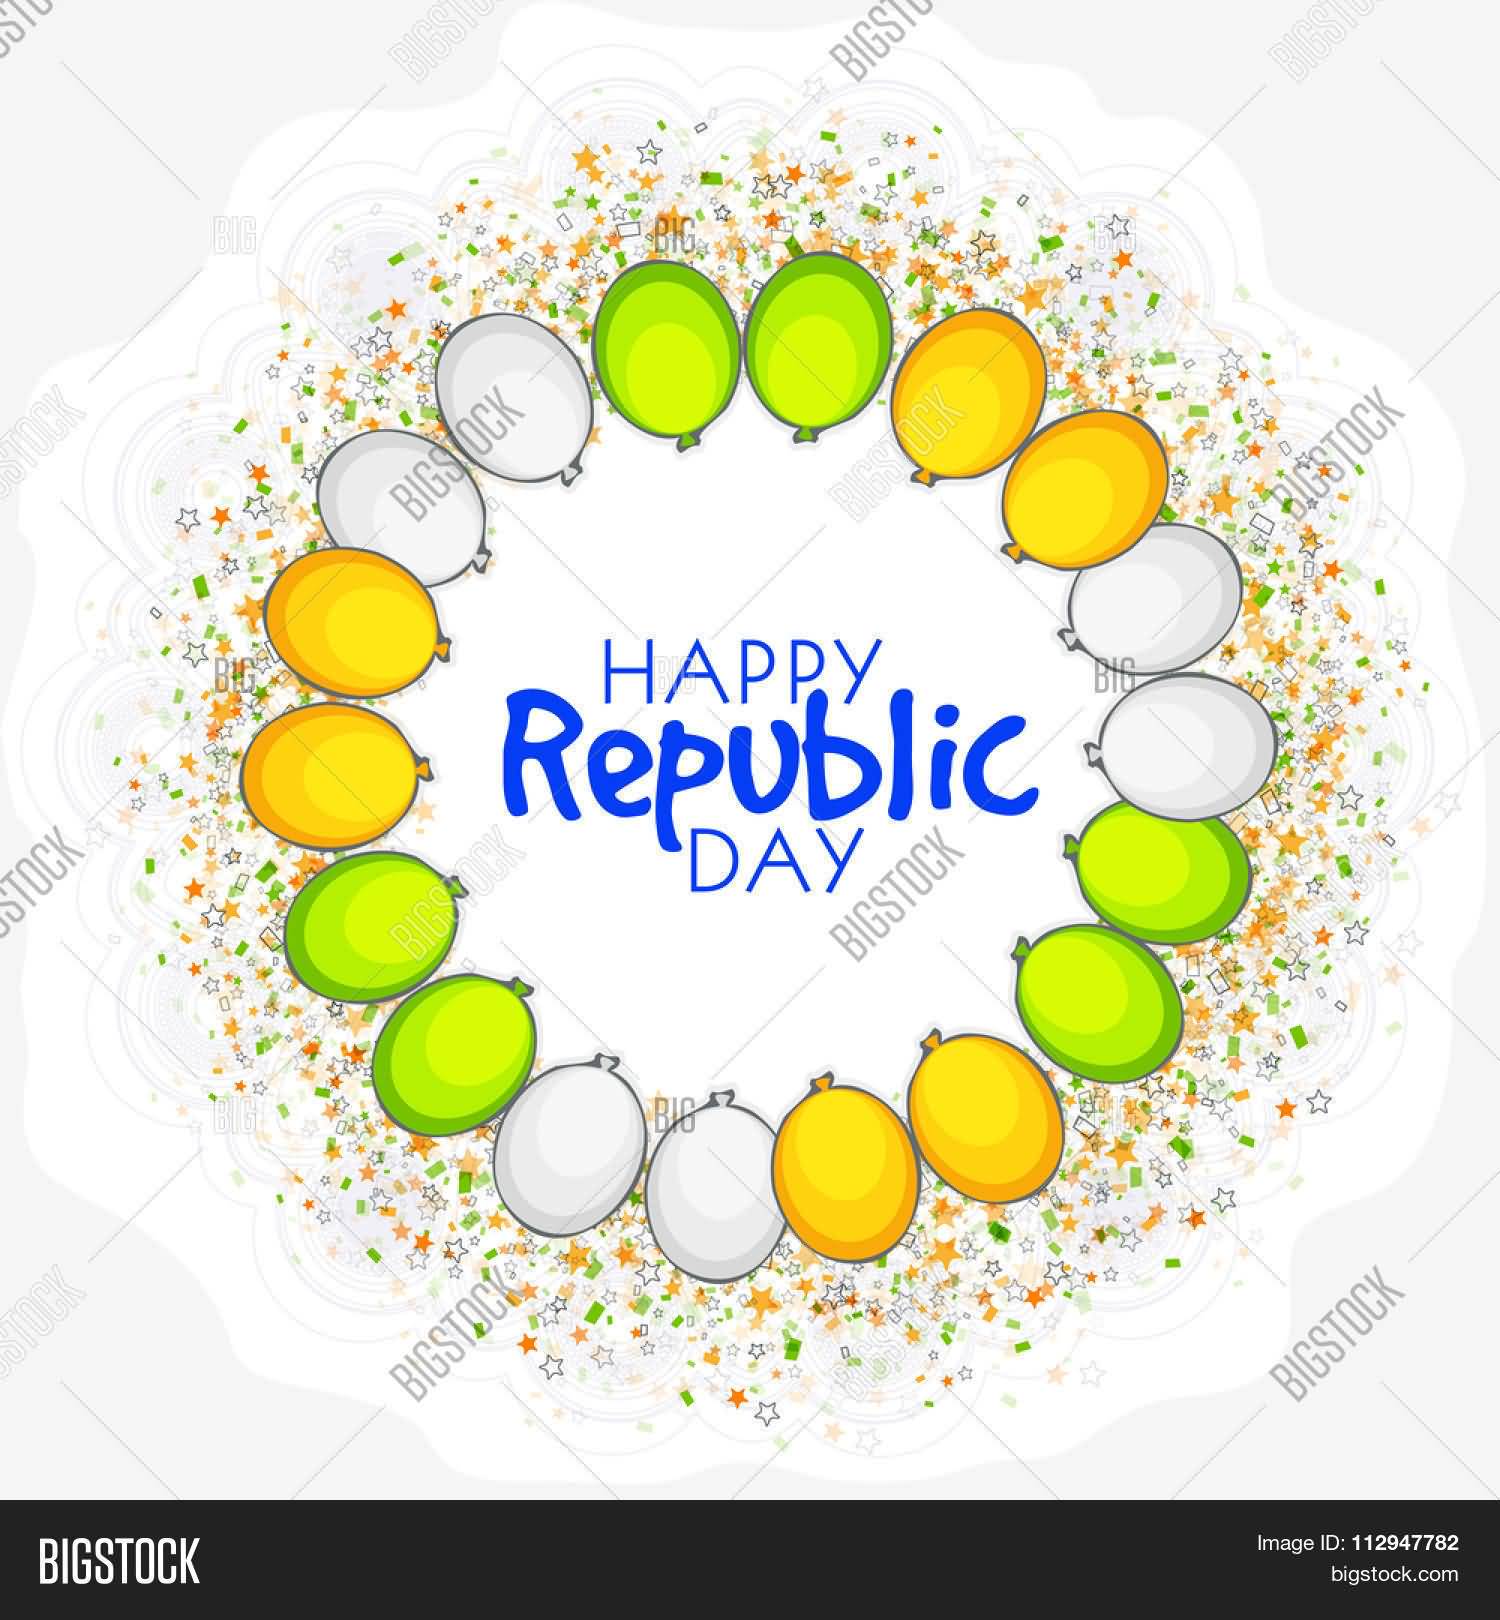 Happy Republic Day Tri Color Balloons Greeting Card Design